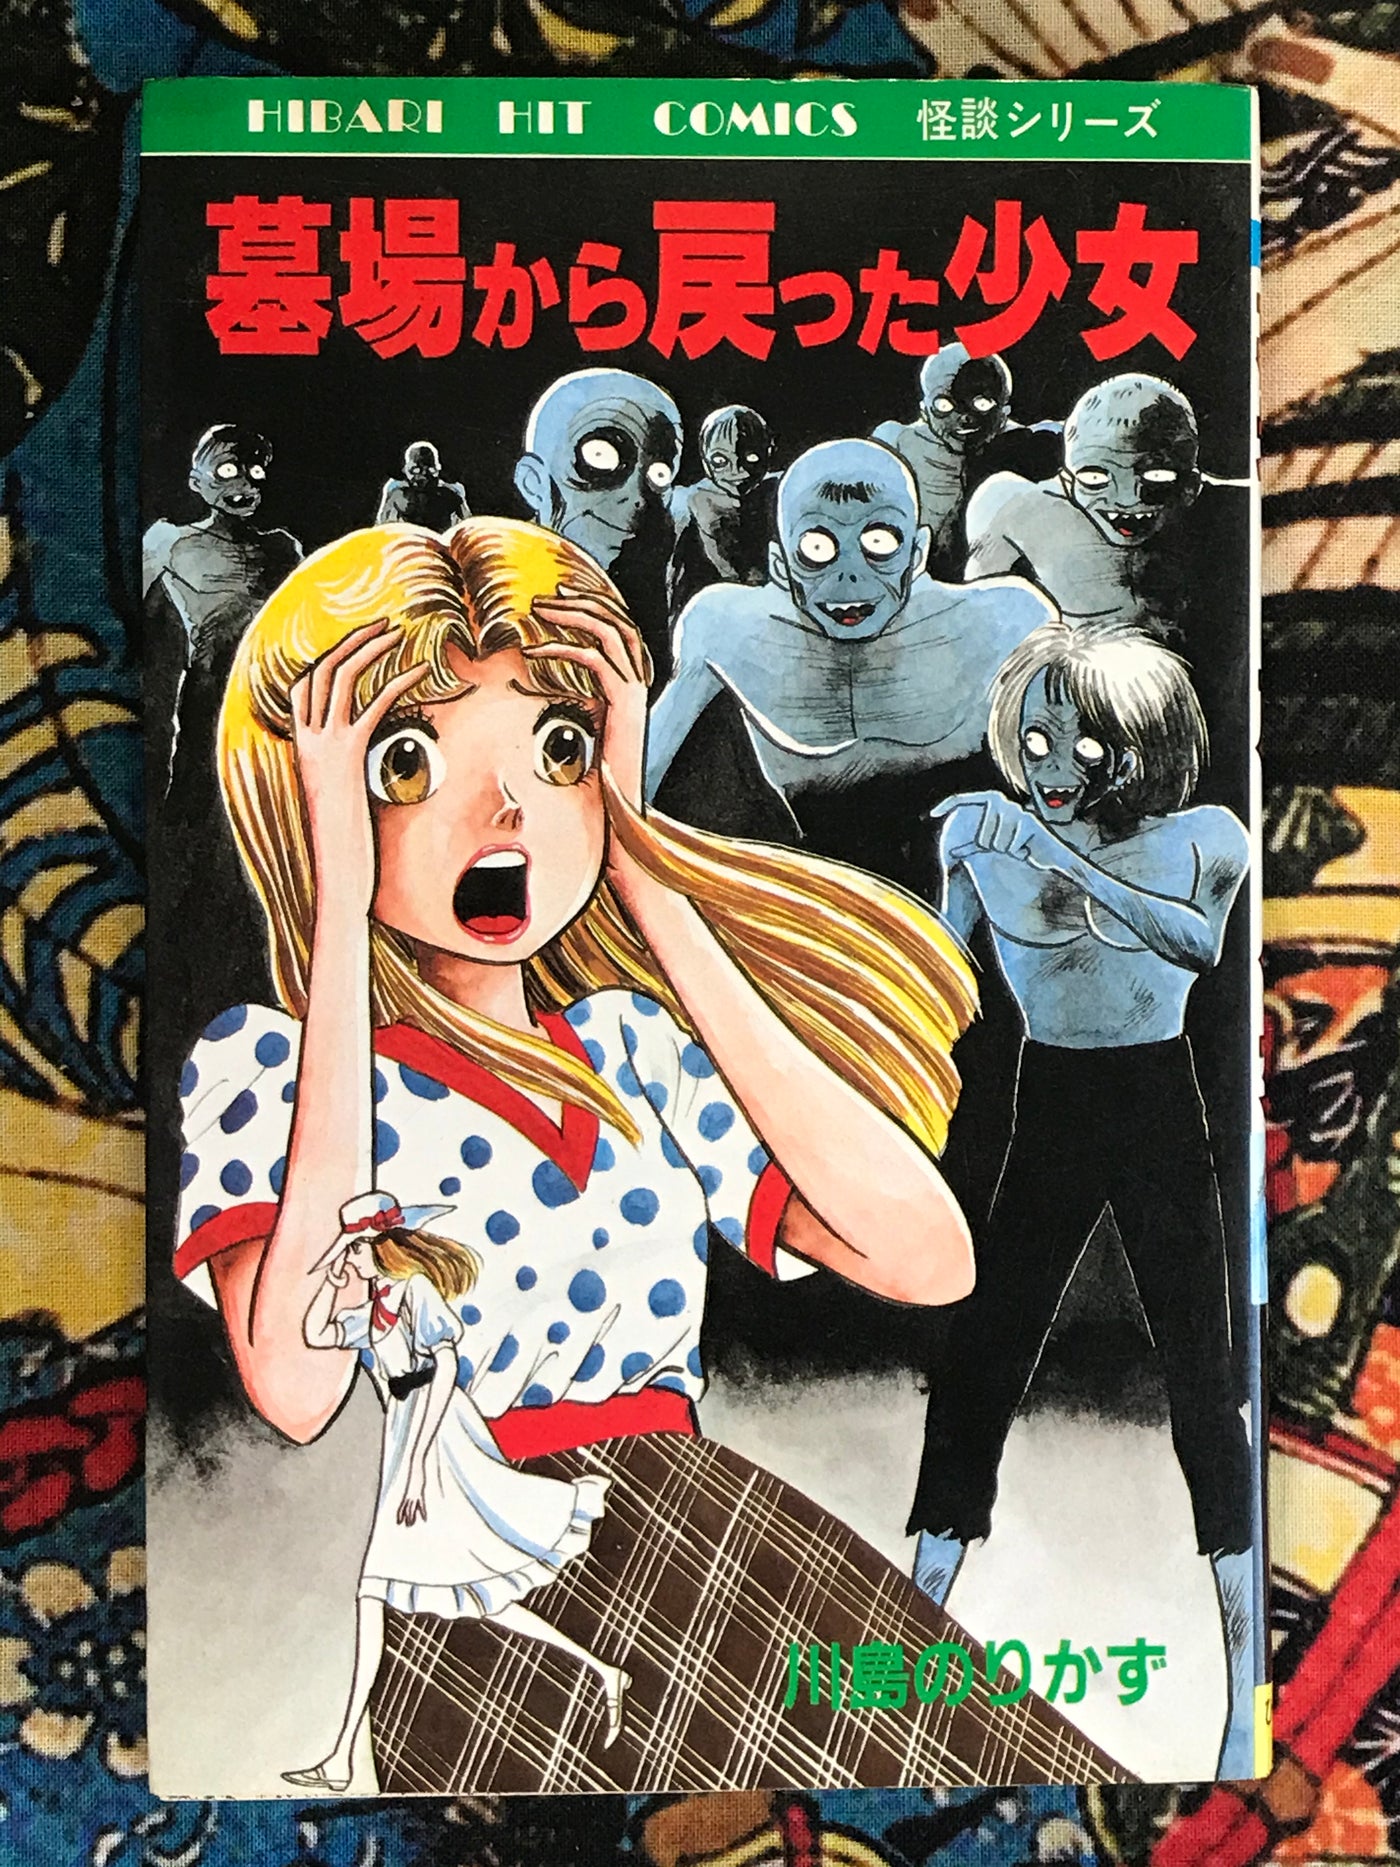 The Girl Who Returned from the Grave by Norikazu Kawashima (1984)